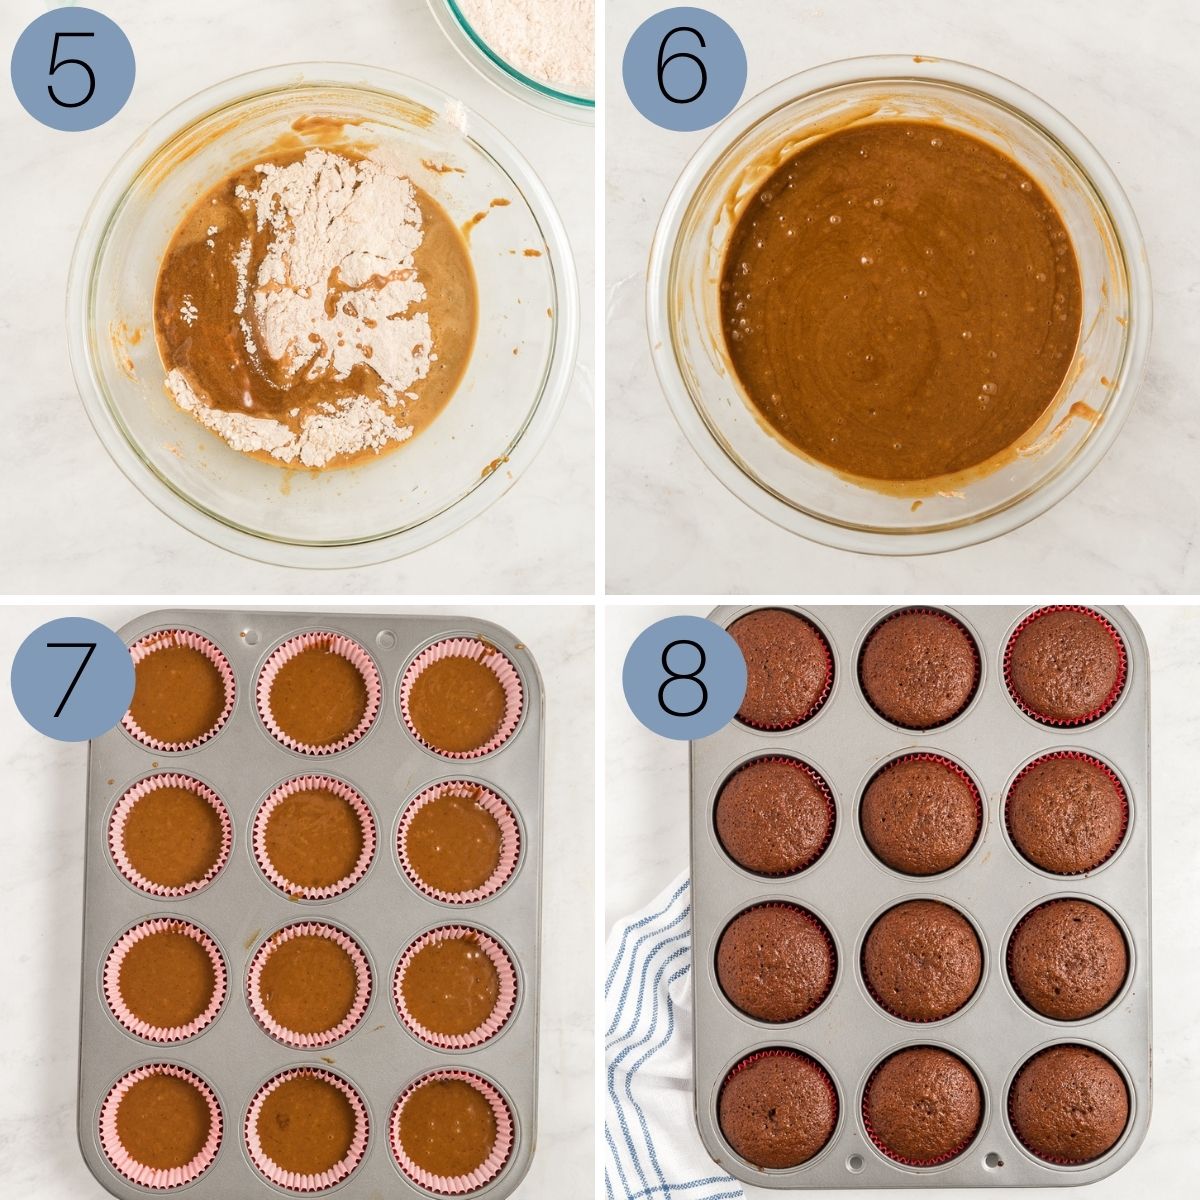 steps 5 to 8 of making the gingerbread cupcake recipe